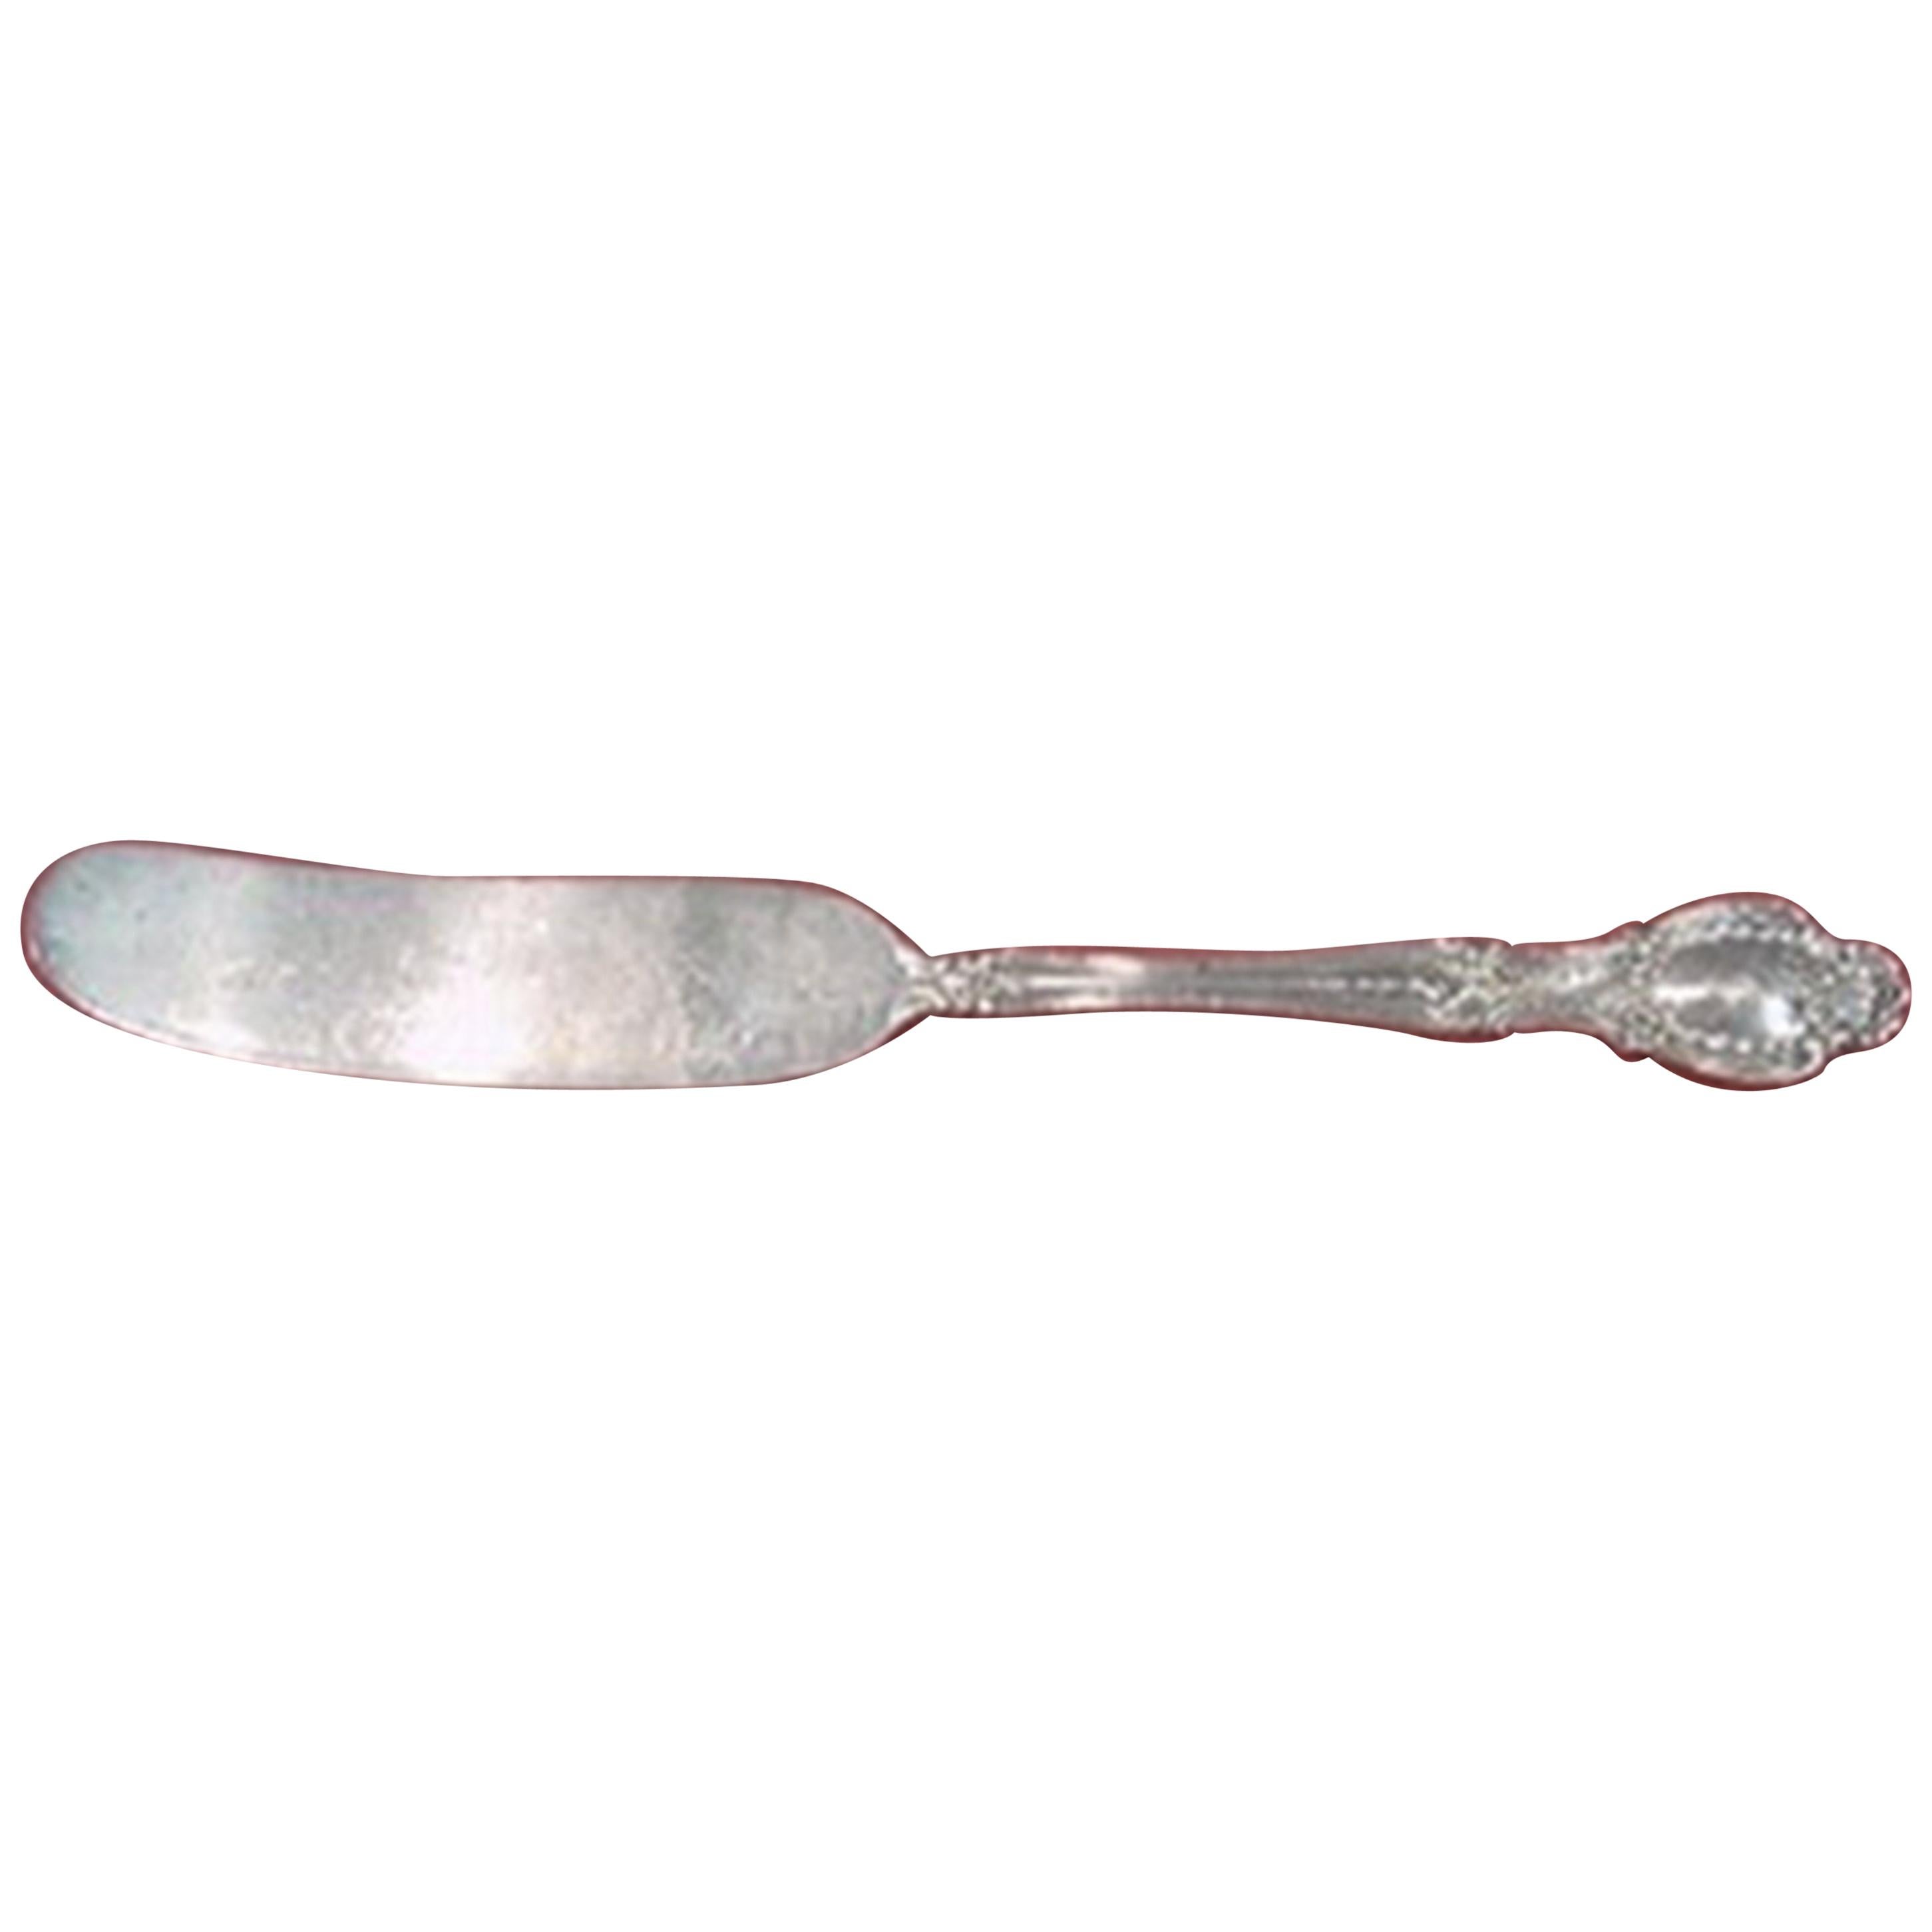 Richelieu by Tiffany and Co Sterling Silver Butter Spreader Flat Handle